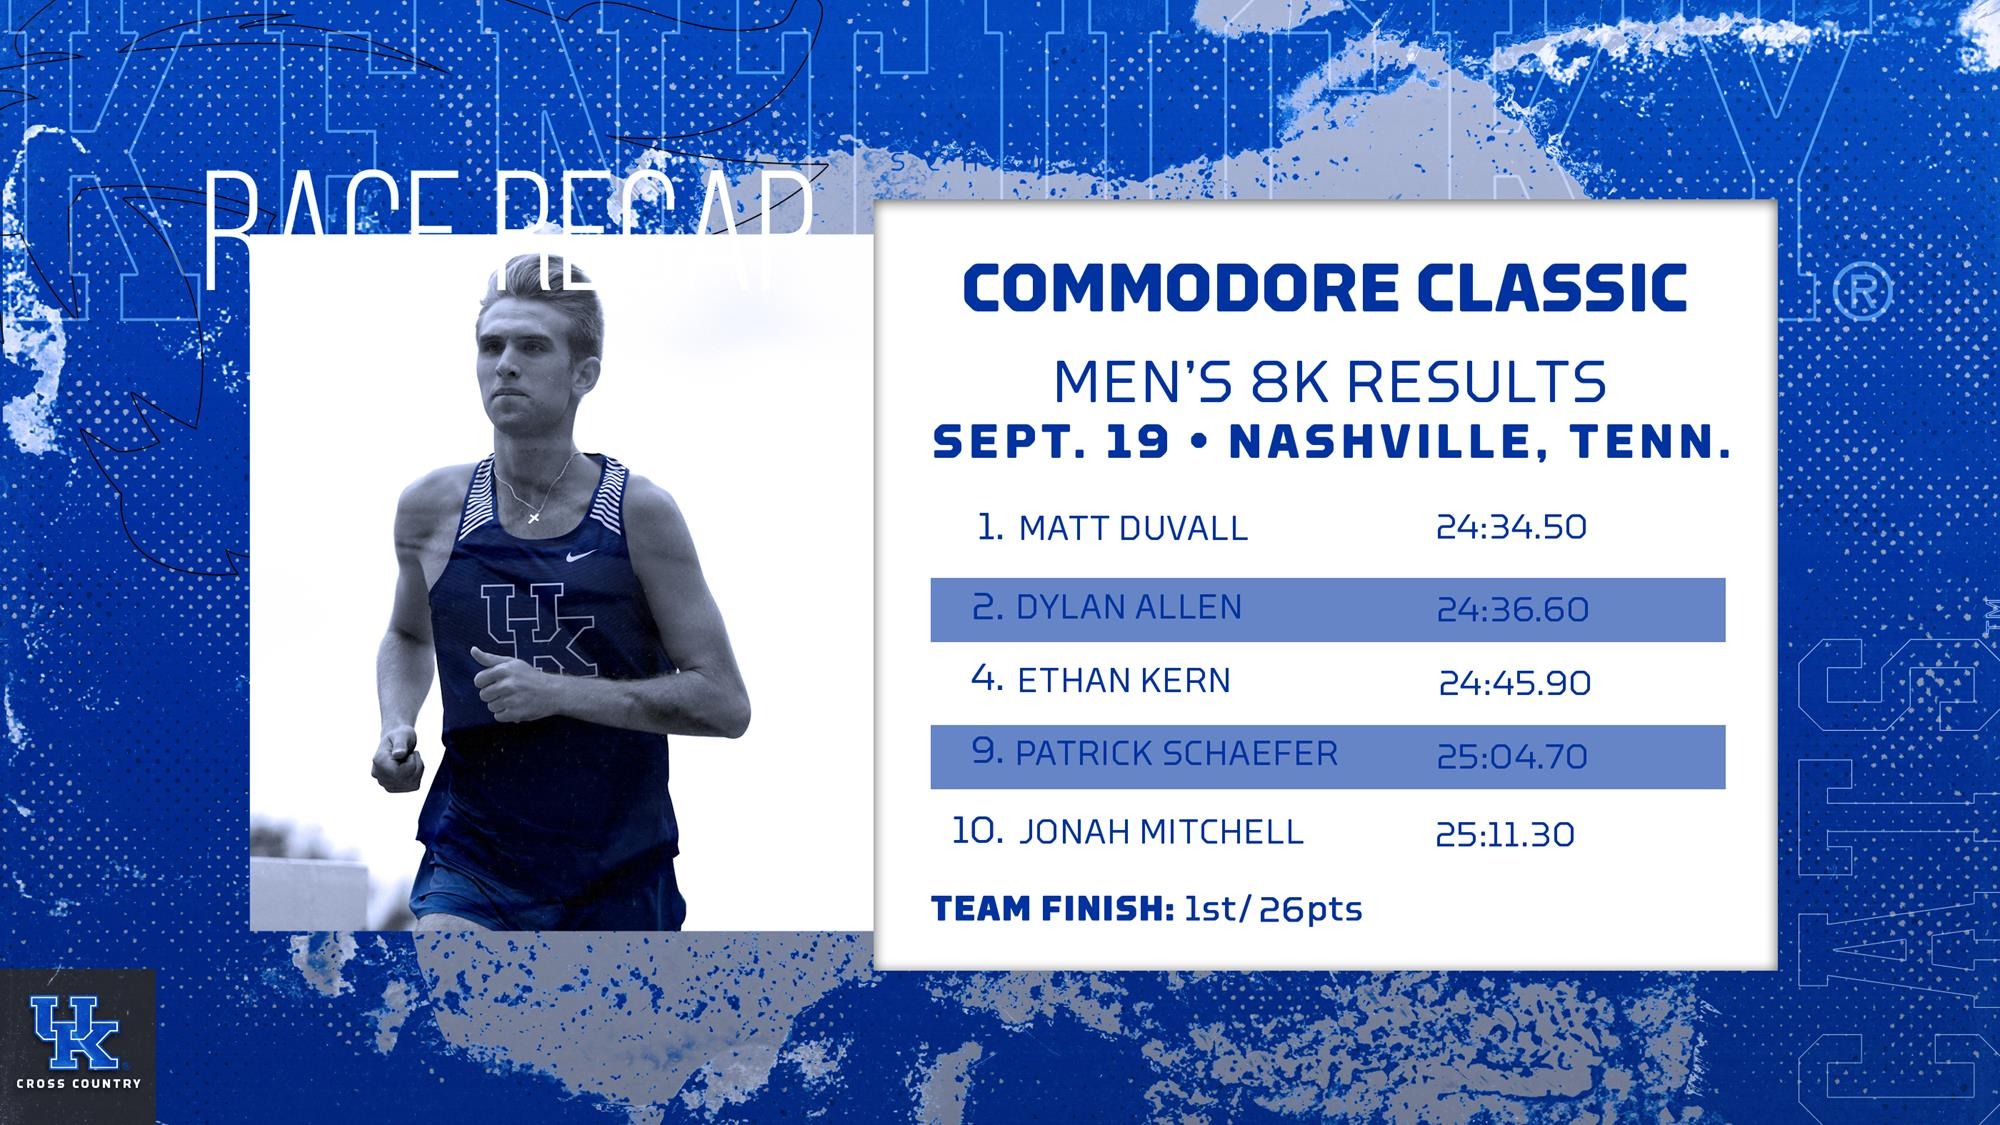 Kentucky Cross Country Sweeps Commodore Classic